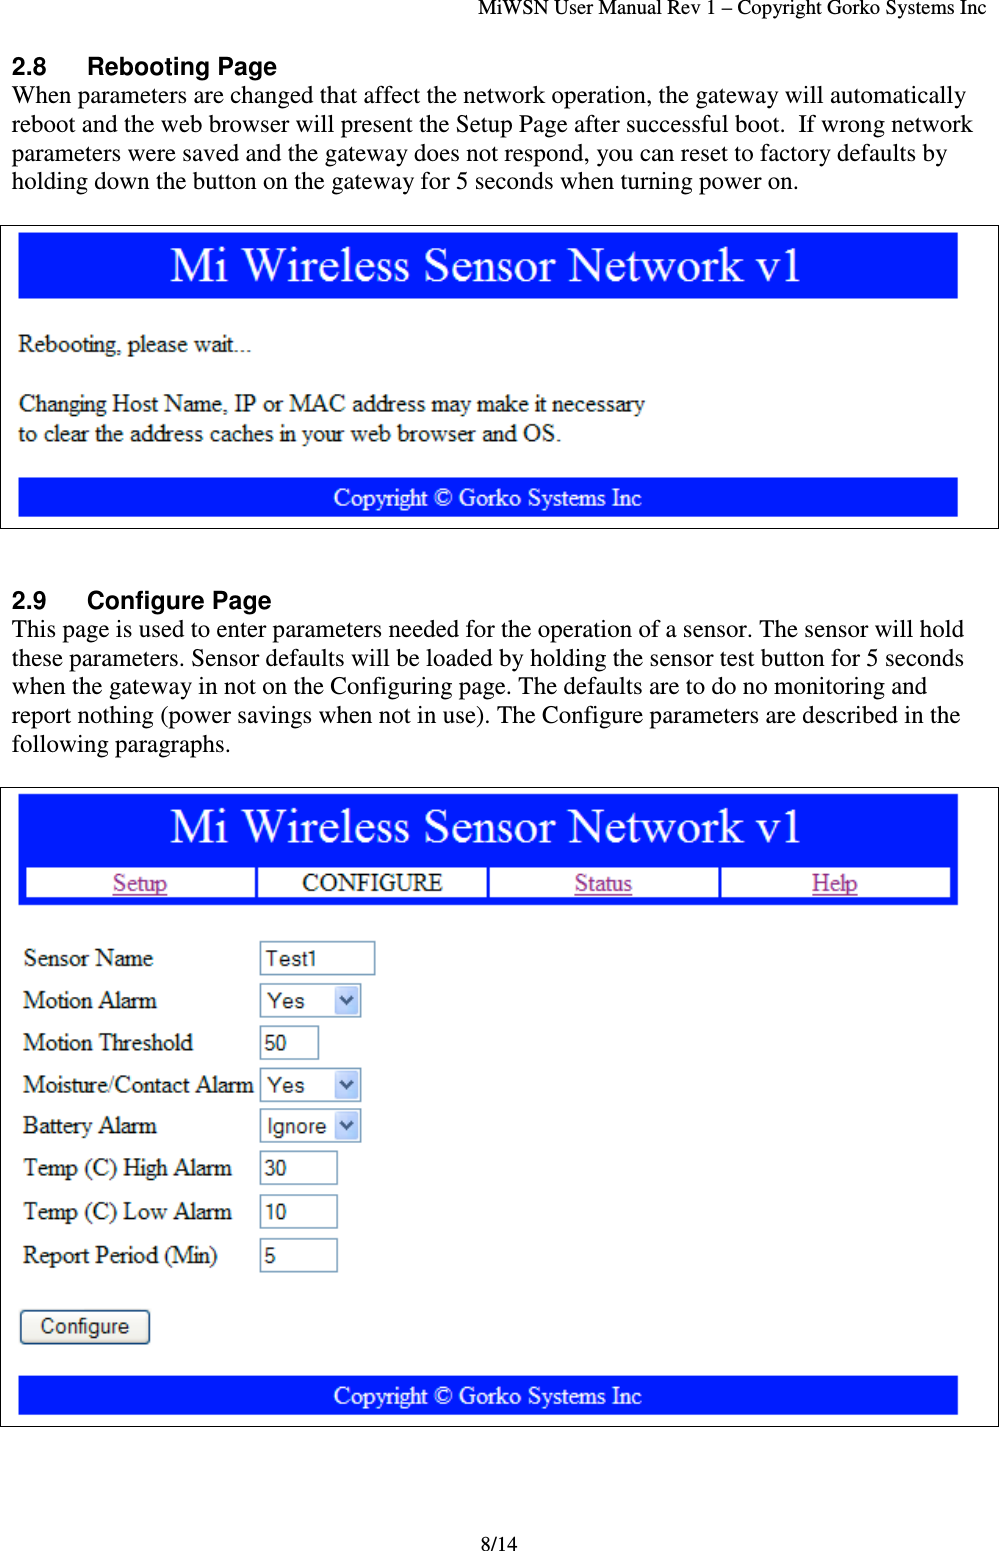 MiWSN User Manual Rev 1 – Copyright Gorko Systems Inc8/142.8 Rebooting PageWhen parameters are changed that affect the network operation, the gateway will automaticallyreboot and the web browser will present the Setup Page after successful boot.  If wrong networkparameters were saved and the gateway does not respond, you can reset to factory defaults byholding down the button on the gateway for 5 seconds when turning power on.2.9 Configure PageThis page is used to enter parameters needed for the operation of a sensor. The sensor will holdthese parameters. Sensor defaults will be loaded by holding the sensor test button for 5 secondswhen the gateway in not on the Configuring page. The defaults are to do no monitoring andreport nothing (power savings when not in use). The Configure parameters are described in thefollowing paragraphs.